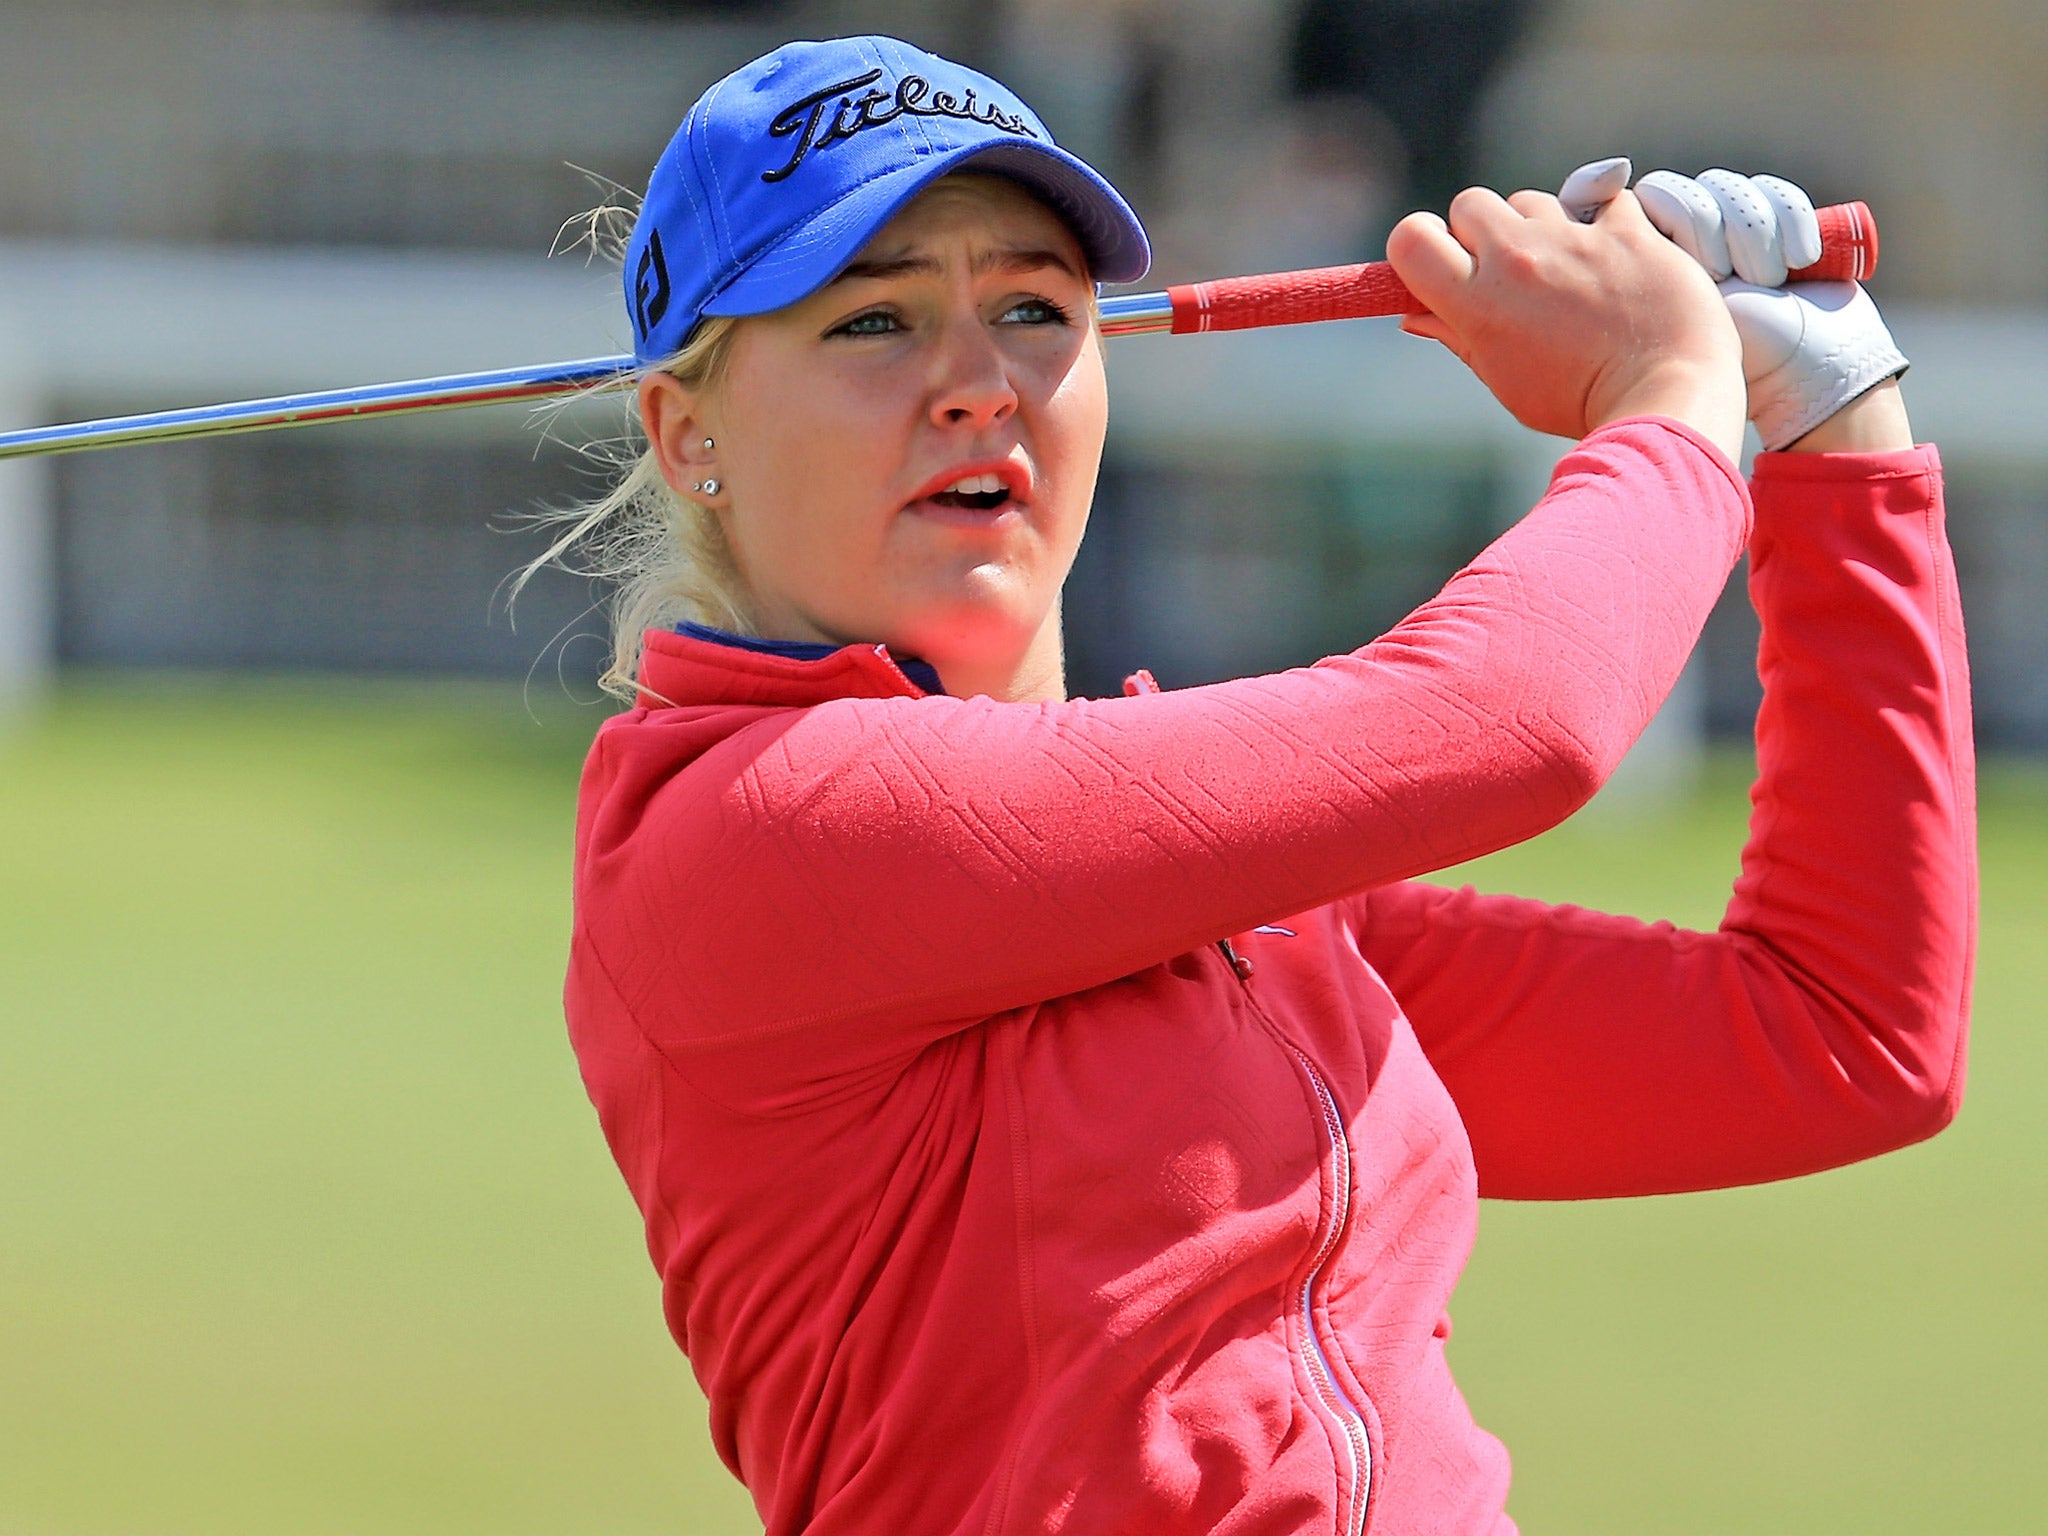 ‘I enjoy the team events, there’s a great atmosphere,’ says Charley Hull